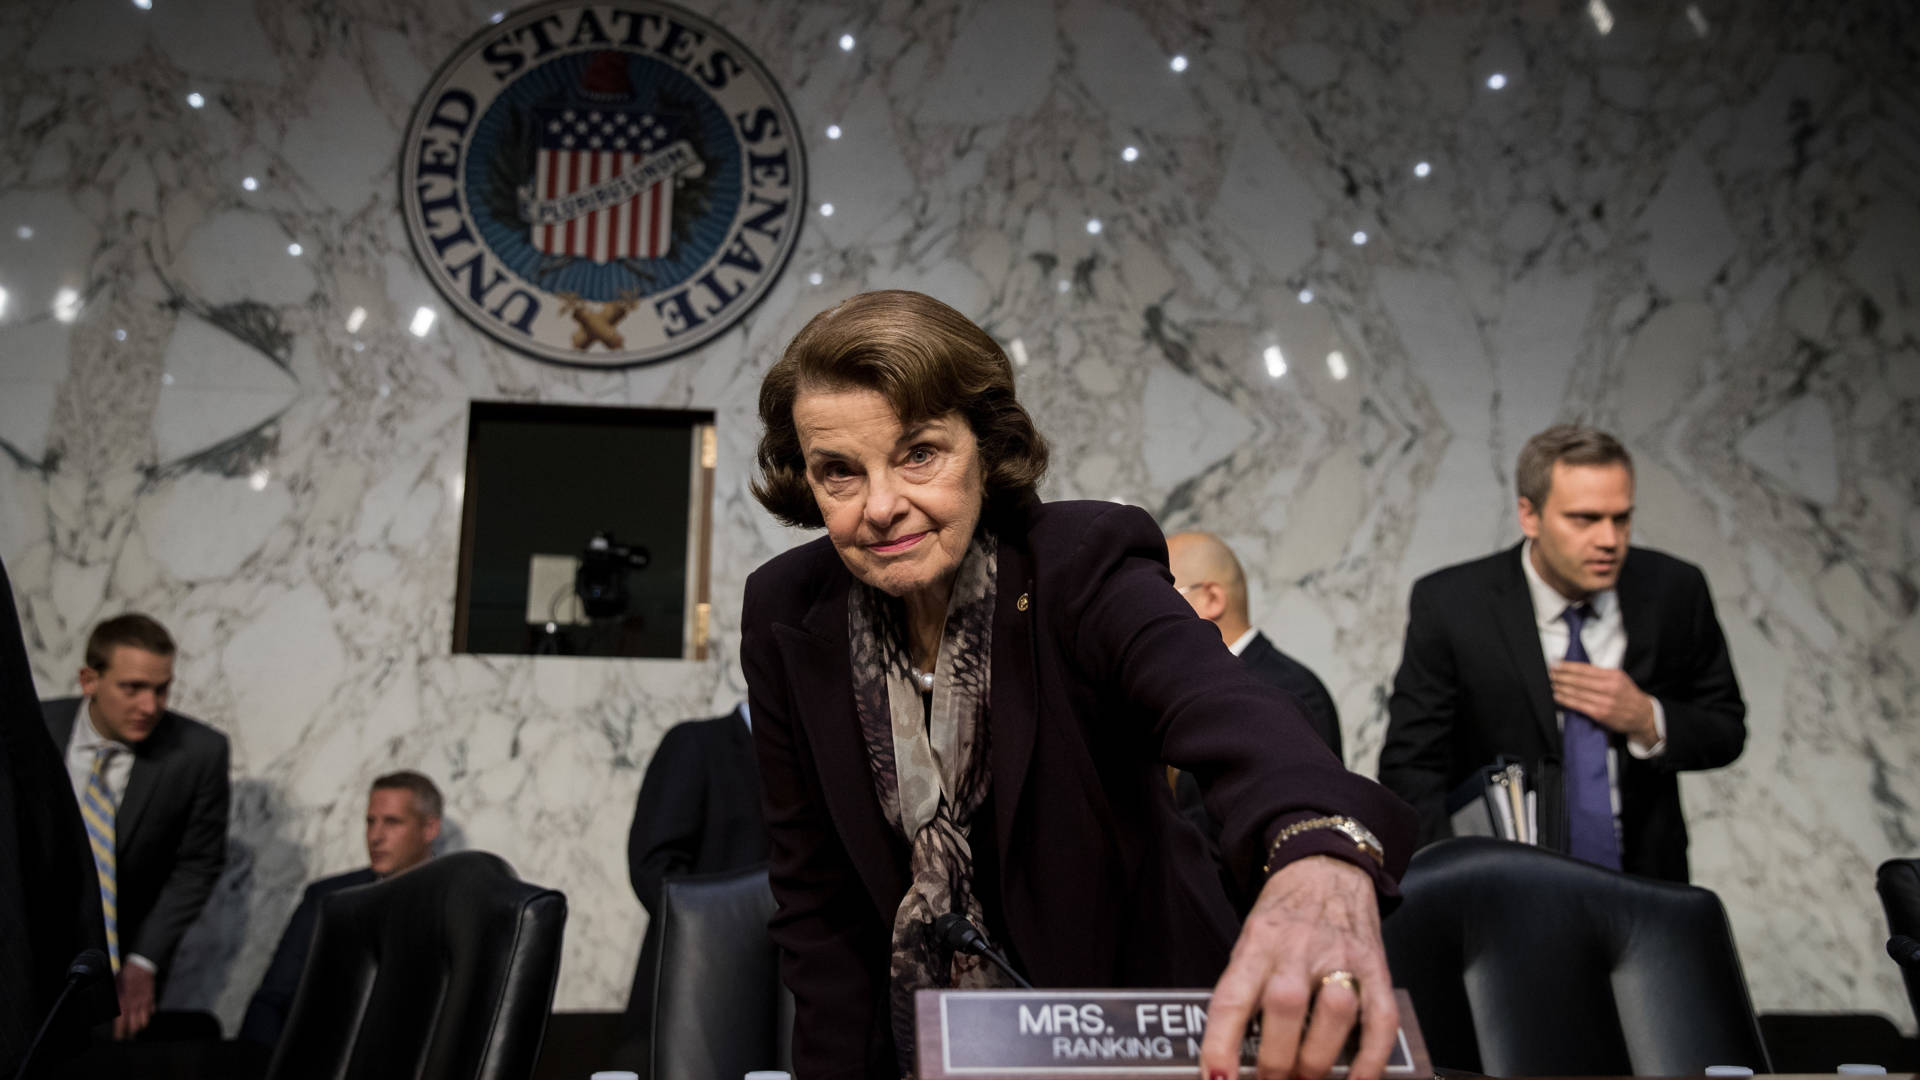 Ranking member Sen. Dianne Feinstein arrives for a Judiciary Committee hearing on Capitol Hill in December. Critics have raised questions about her age as she runs for re-election. Drew Angerer/Getty Images